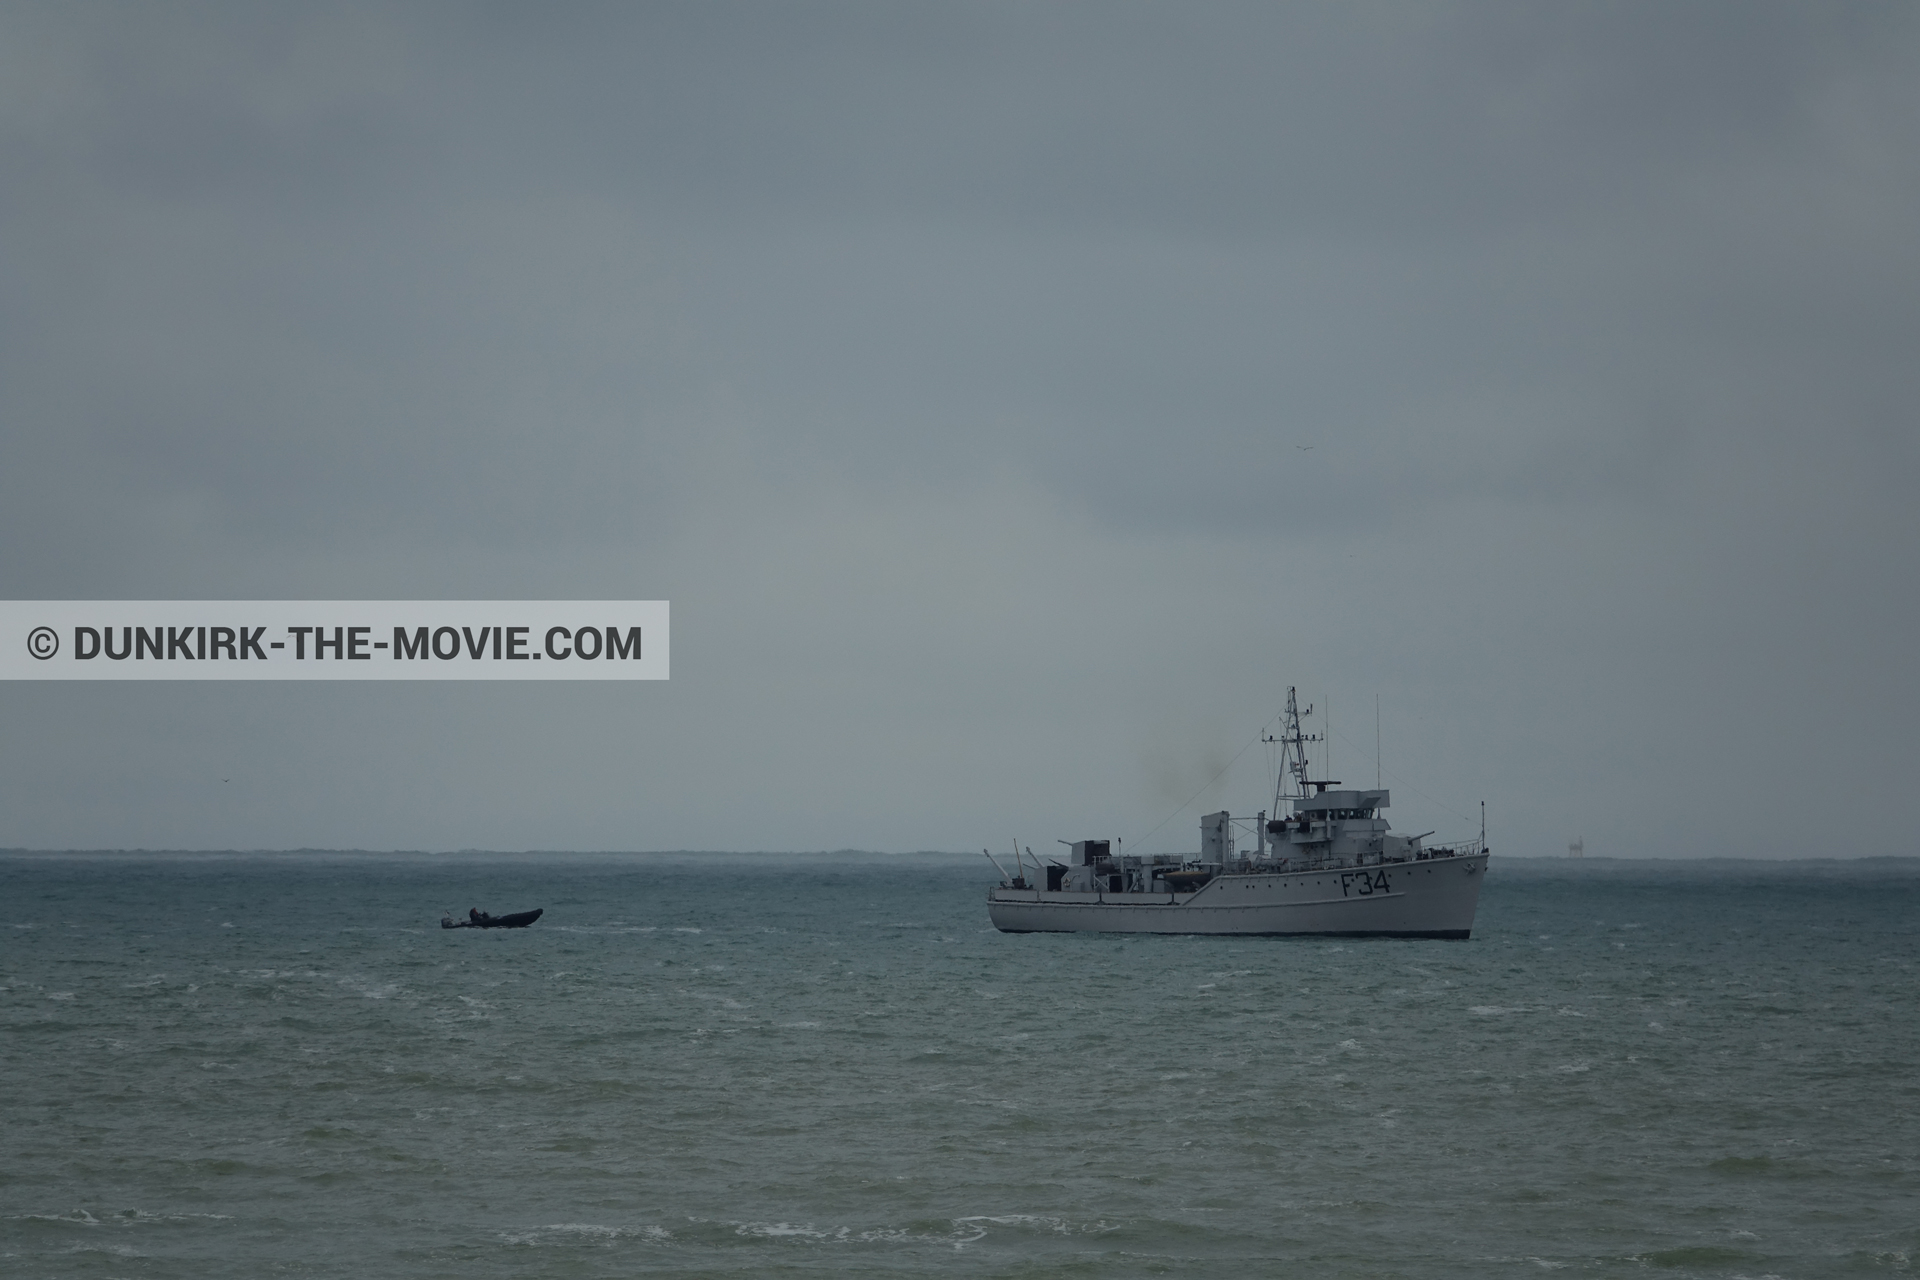 Picture with boat, grey sky, F34 - Hr.Ms. Sittard, calm sea,  from behind the scene of the Dunkirk movie by Nolan